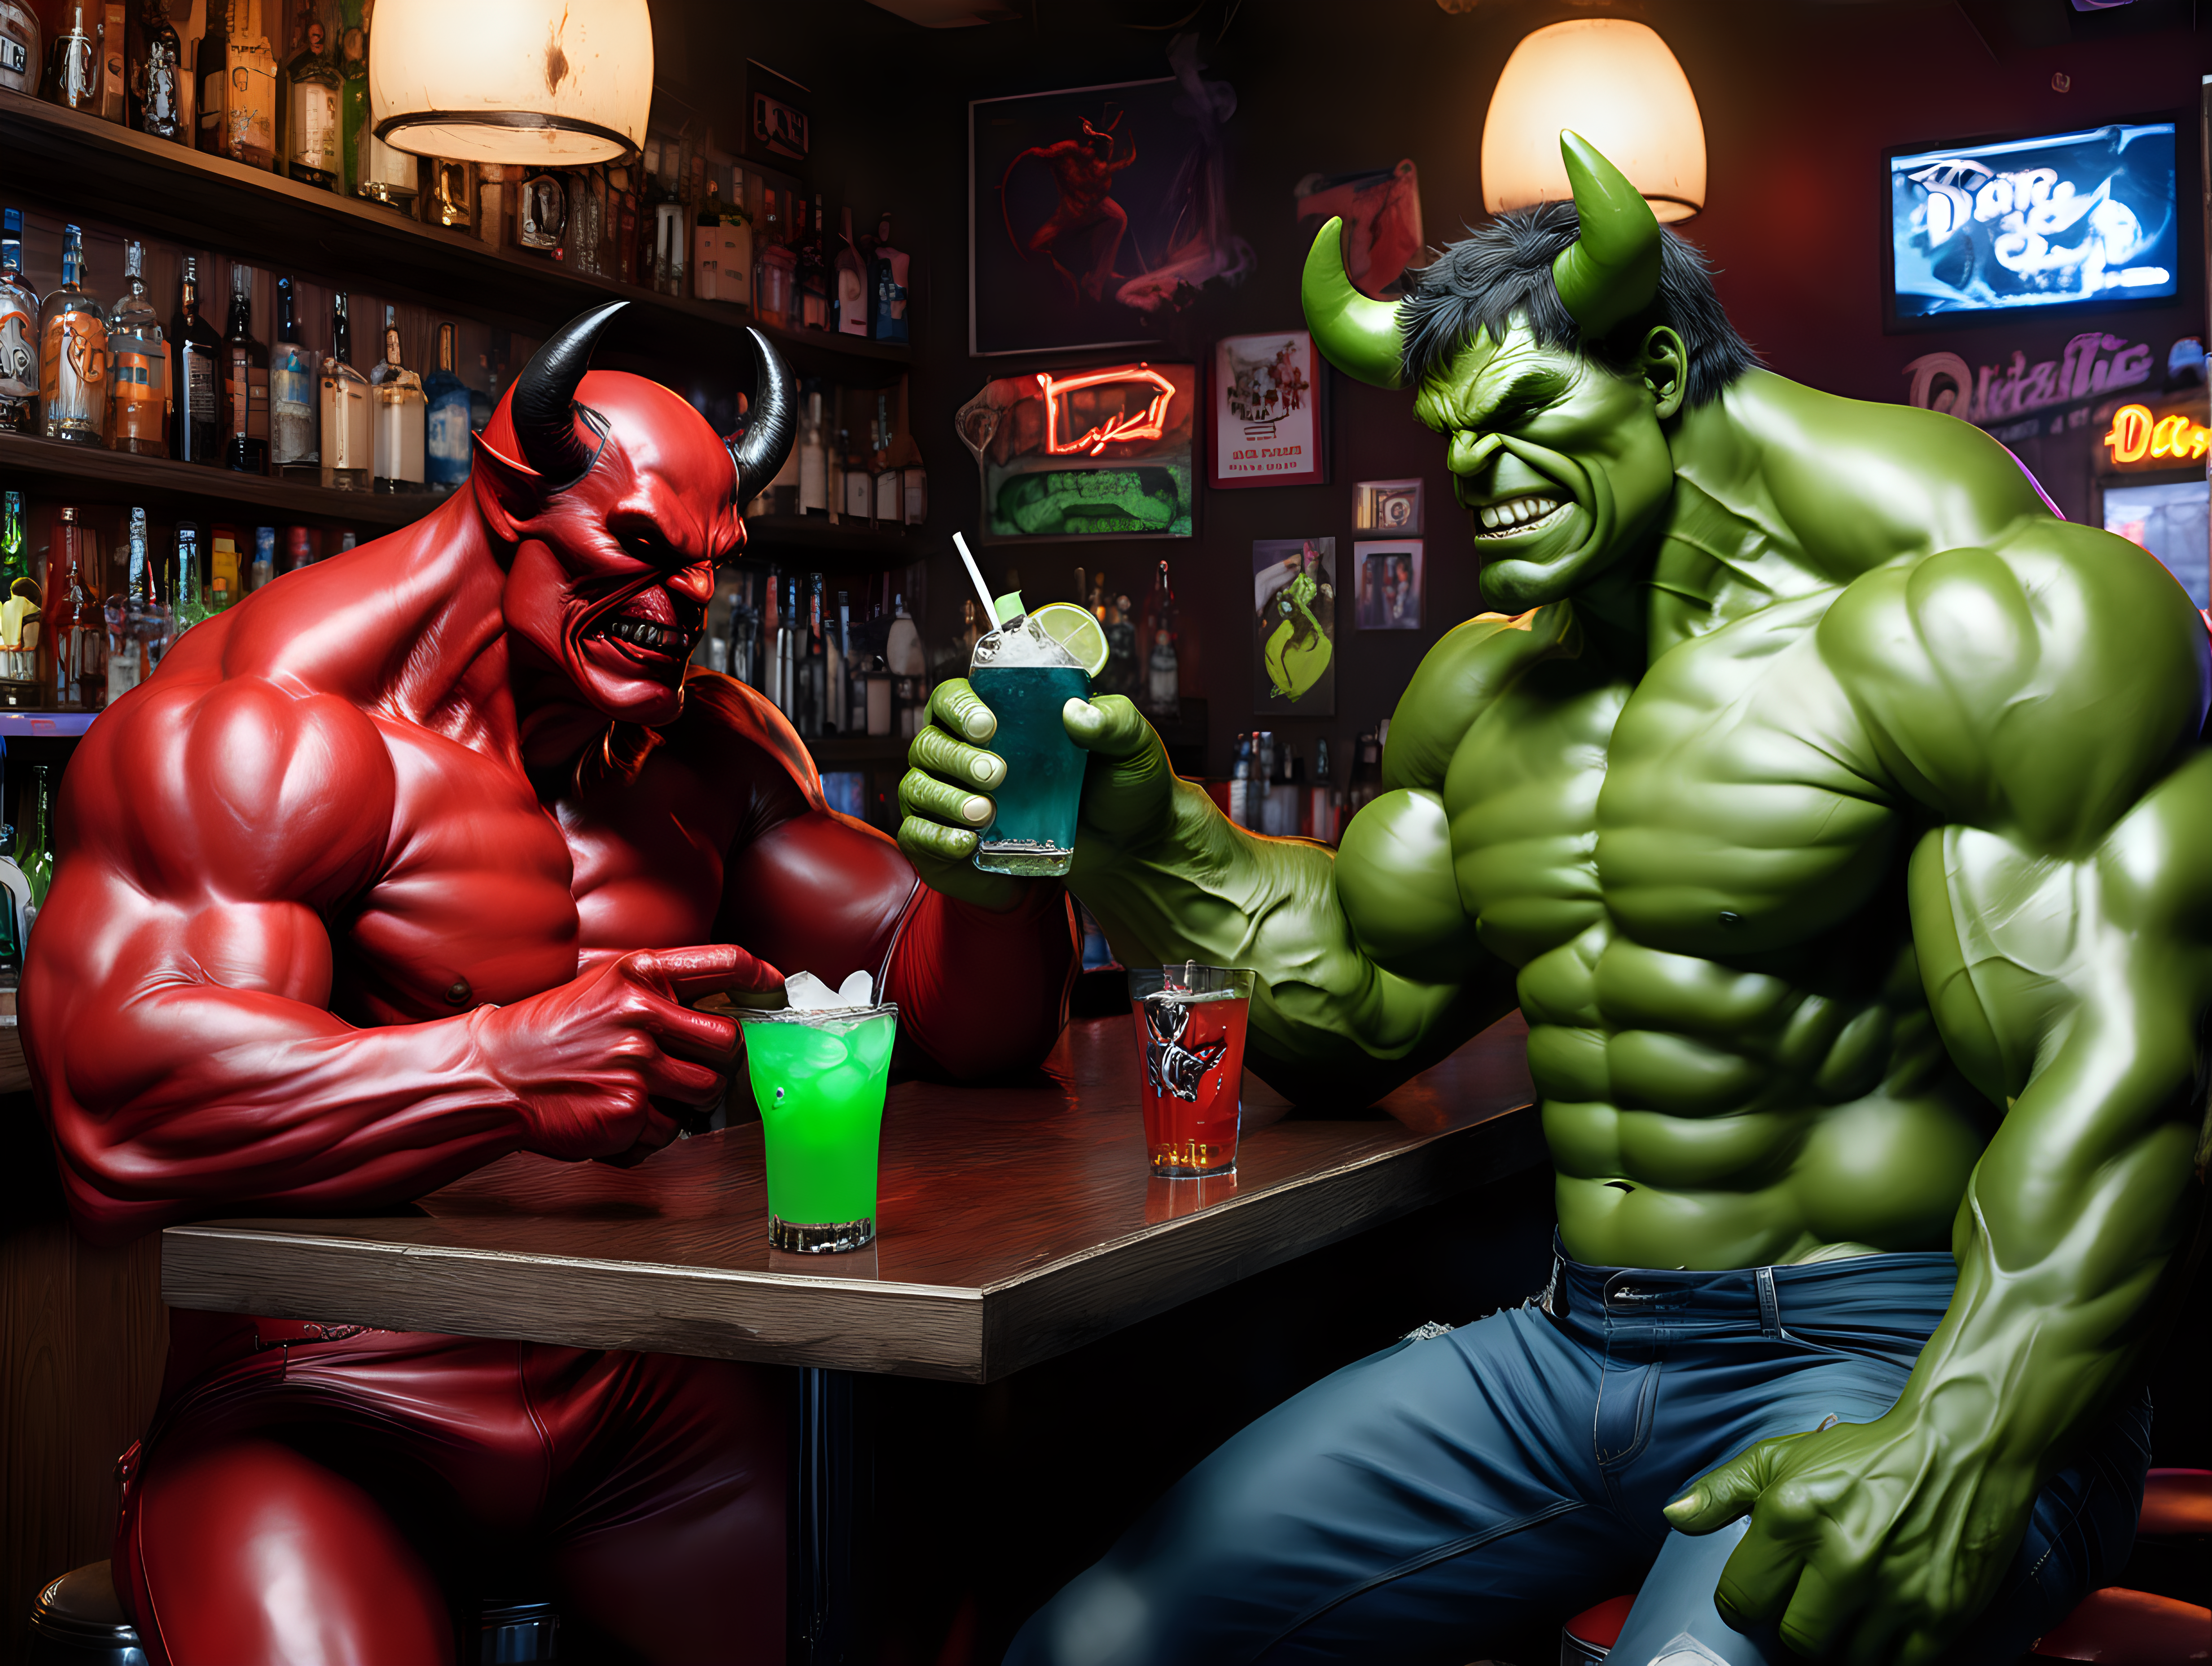 Devil and Hulk have drinks in a dive bar